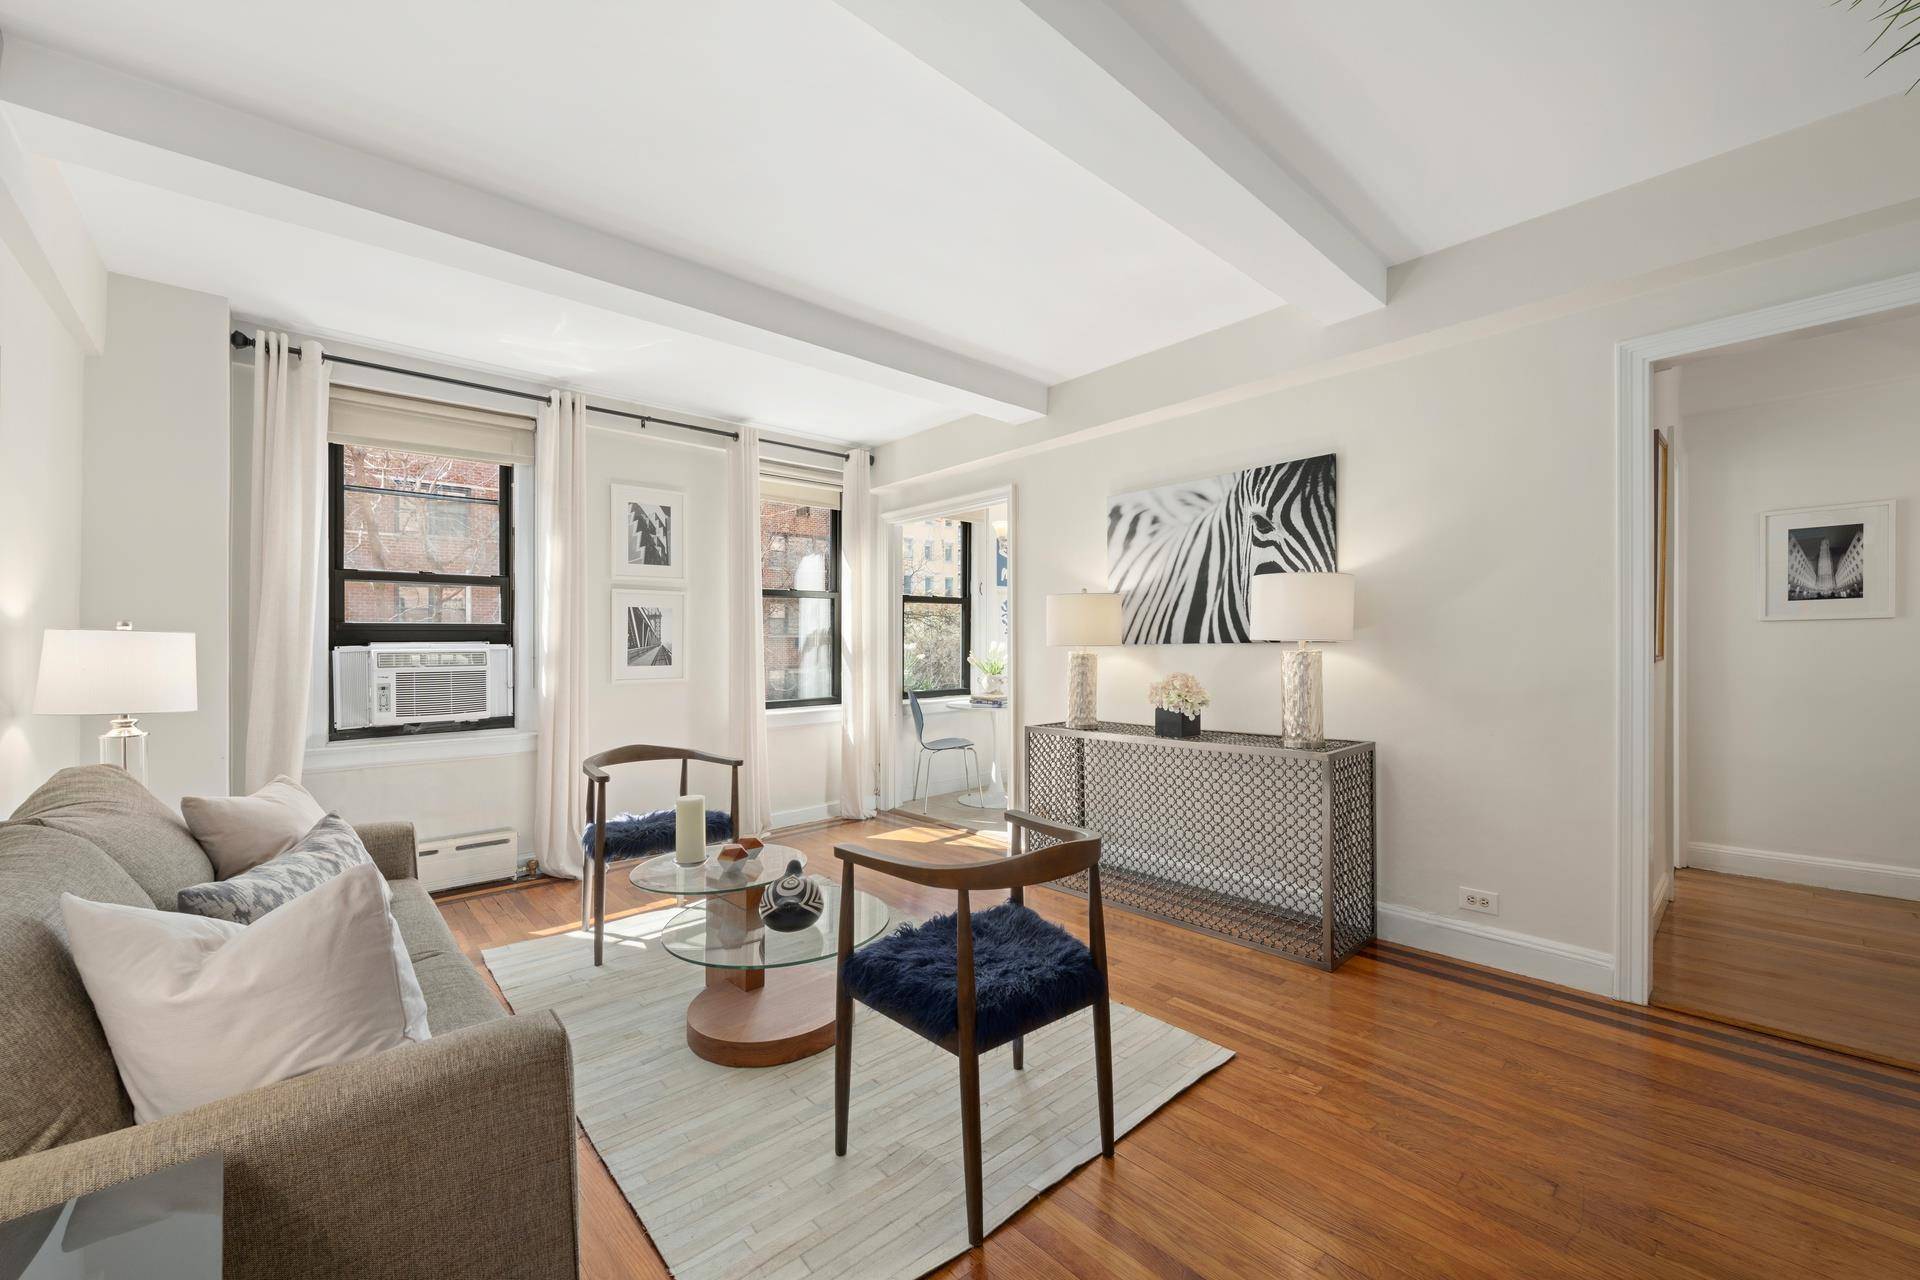 Price adjustment Oversized charm priced to move, this sunny south facing and immense 1 bedroom located at 321 East 54th Street Apartment 3B, New York, NY 10022 offers fabulous light, ...